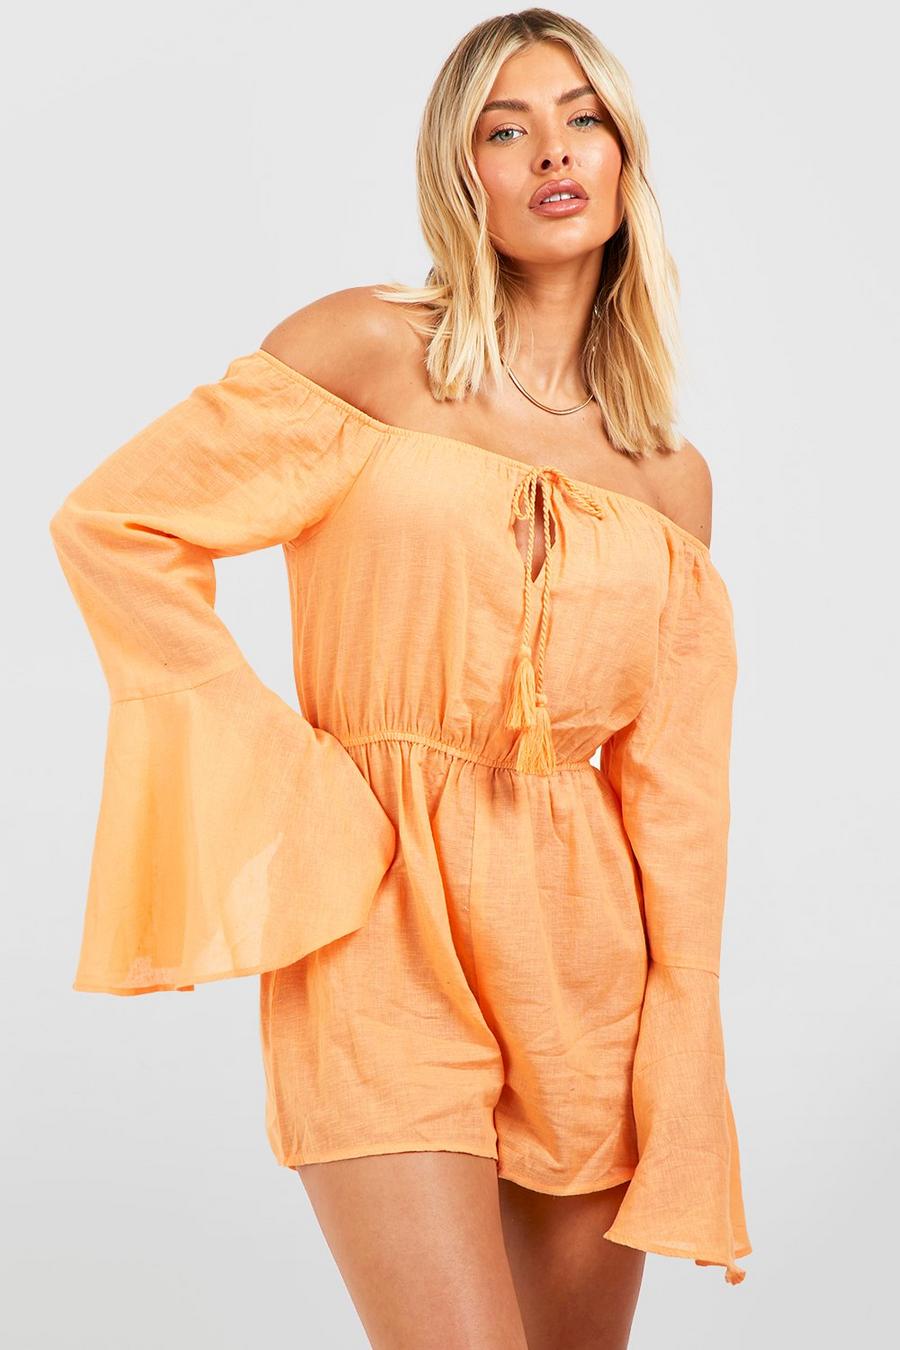 Shop Now and Get 20% Off on Women Rompers - Summer Beach Bib